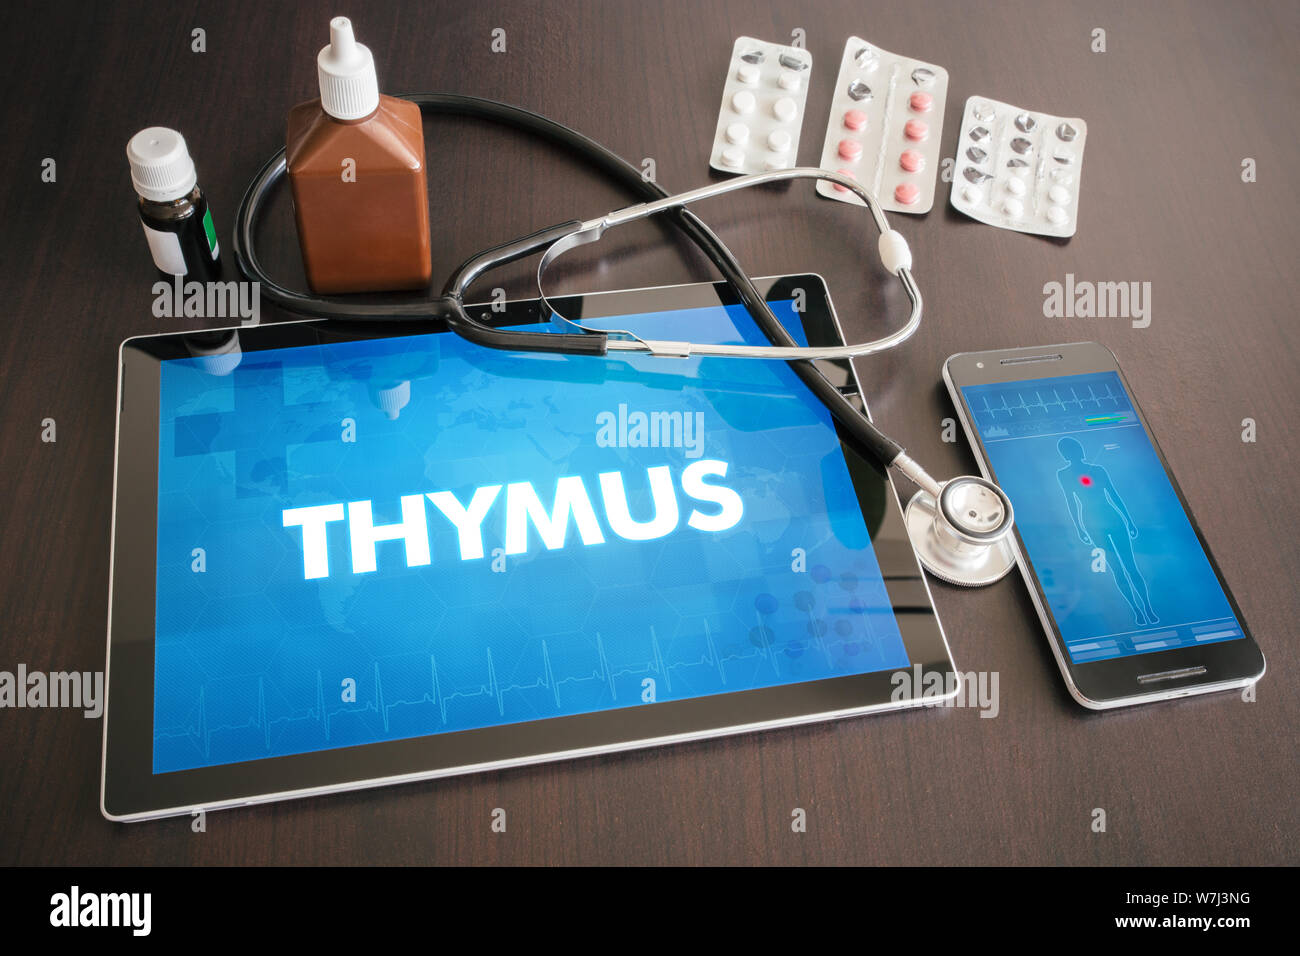 Thymus (endocrine disease related) diagnosis medical concept on tablet screen with stethoscope. Stock Photo